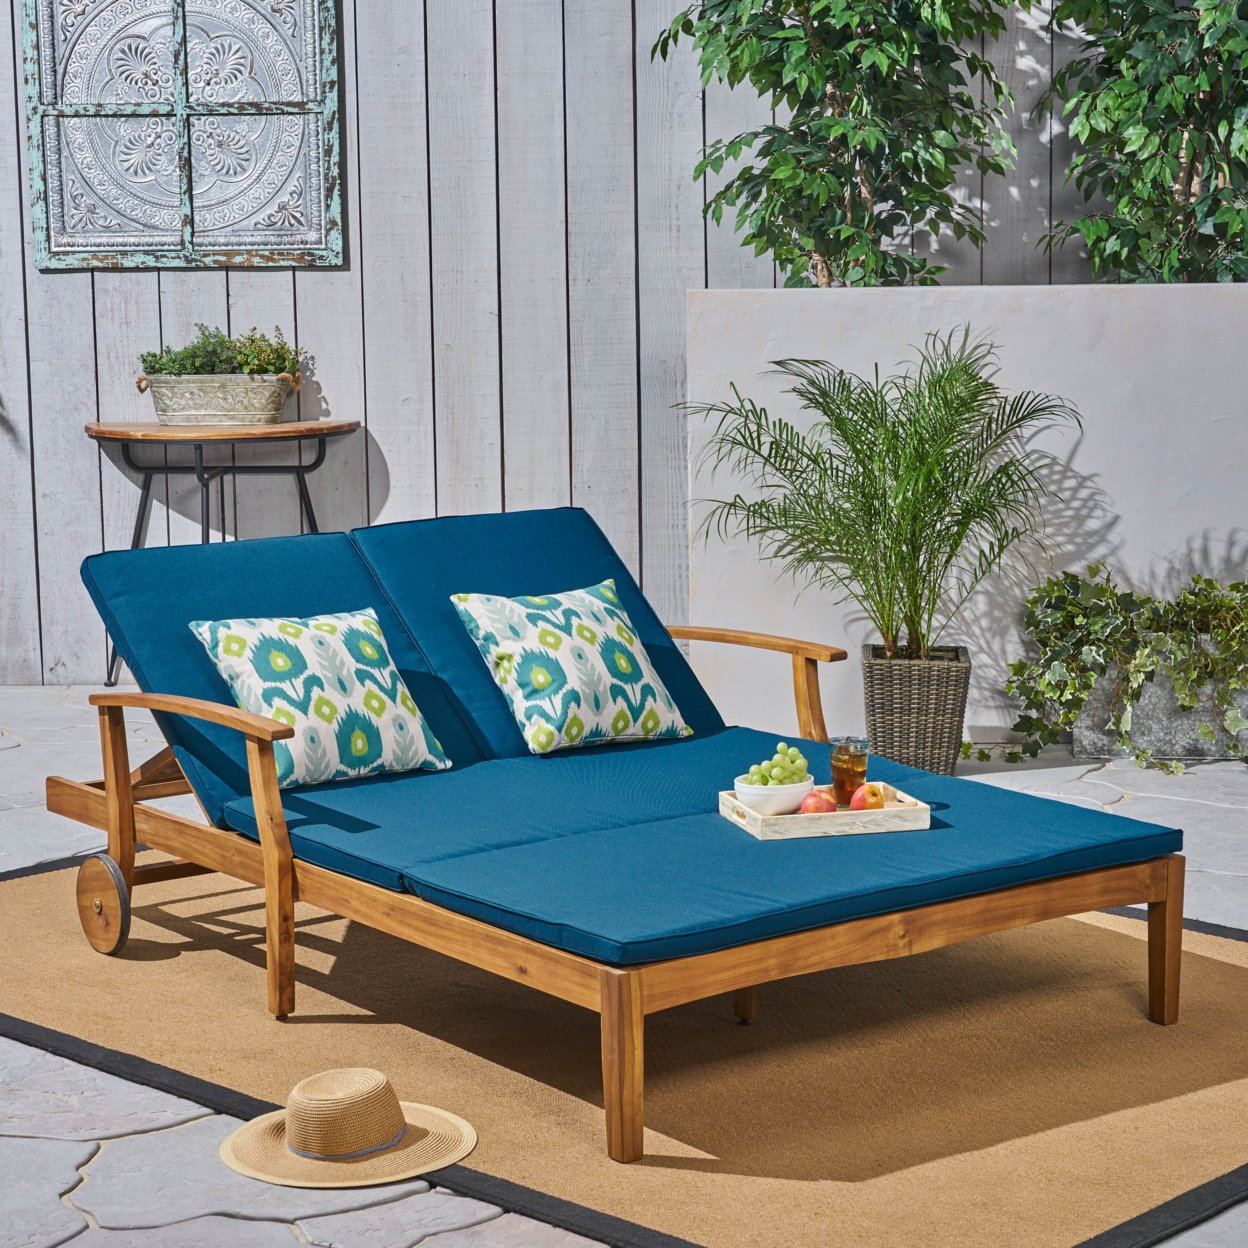 Samantha Double Chaise Lounge For Yard And Patio, Acacia Wood Frame - Orange